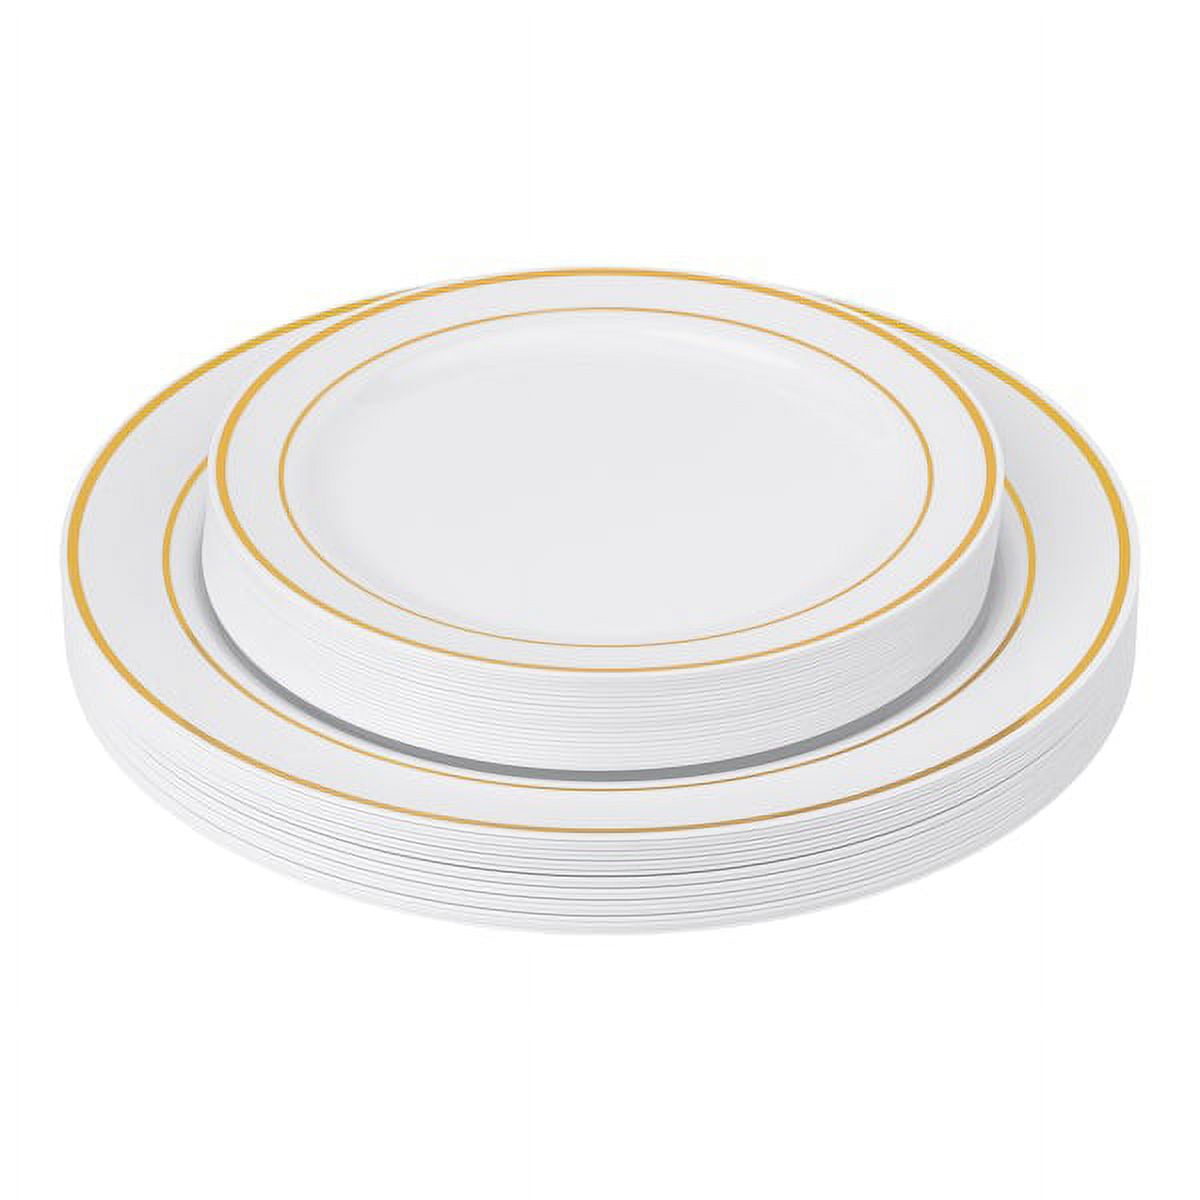 Stock Your Home 400 Count Premium White Plastic Plates, 6 inch White Disposable Wedding Cake Plates, Heavy Duty Plastic Dessert Plates, Cocktail